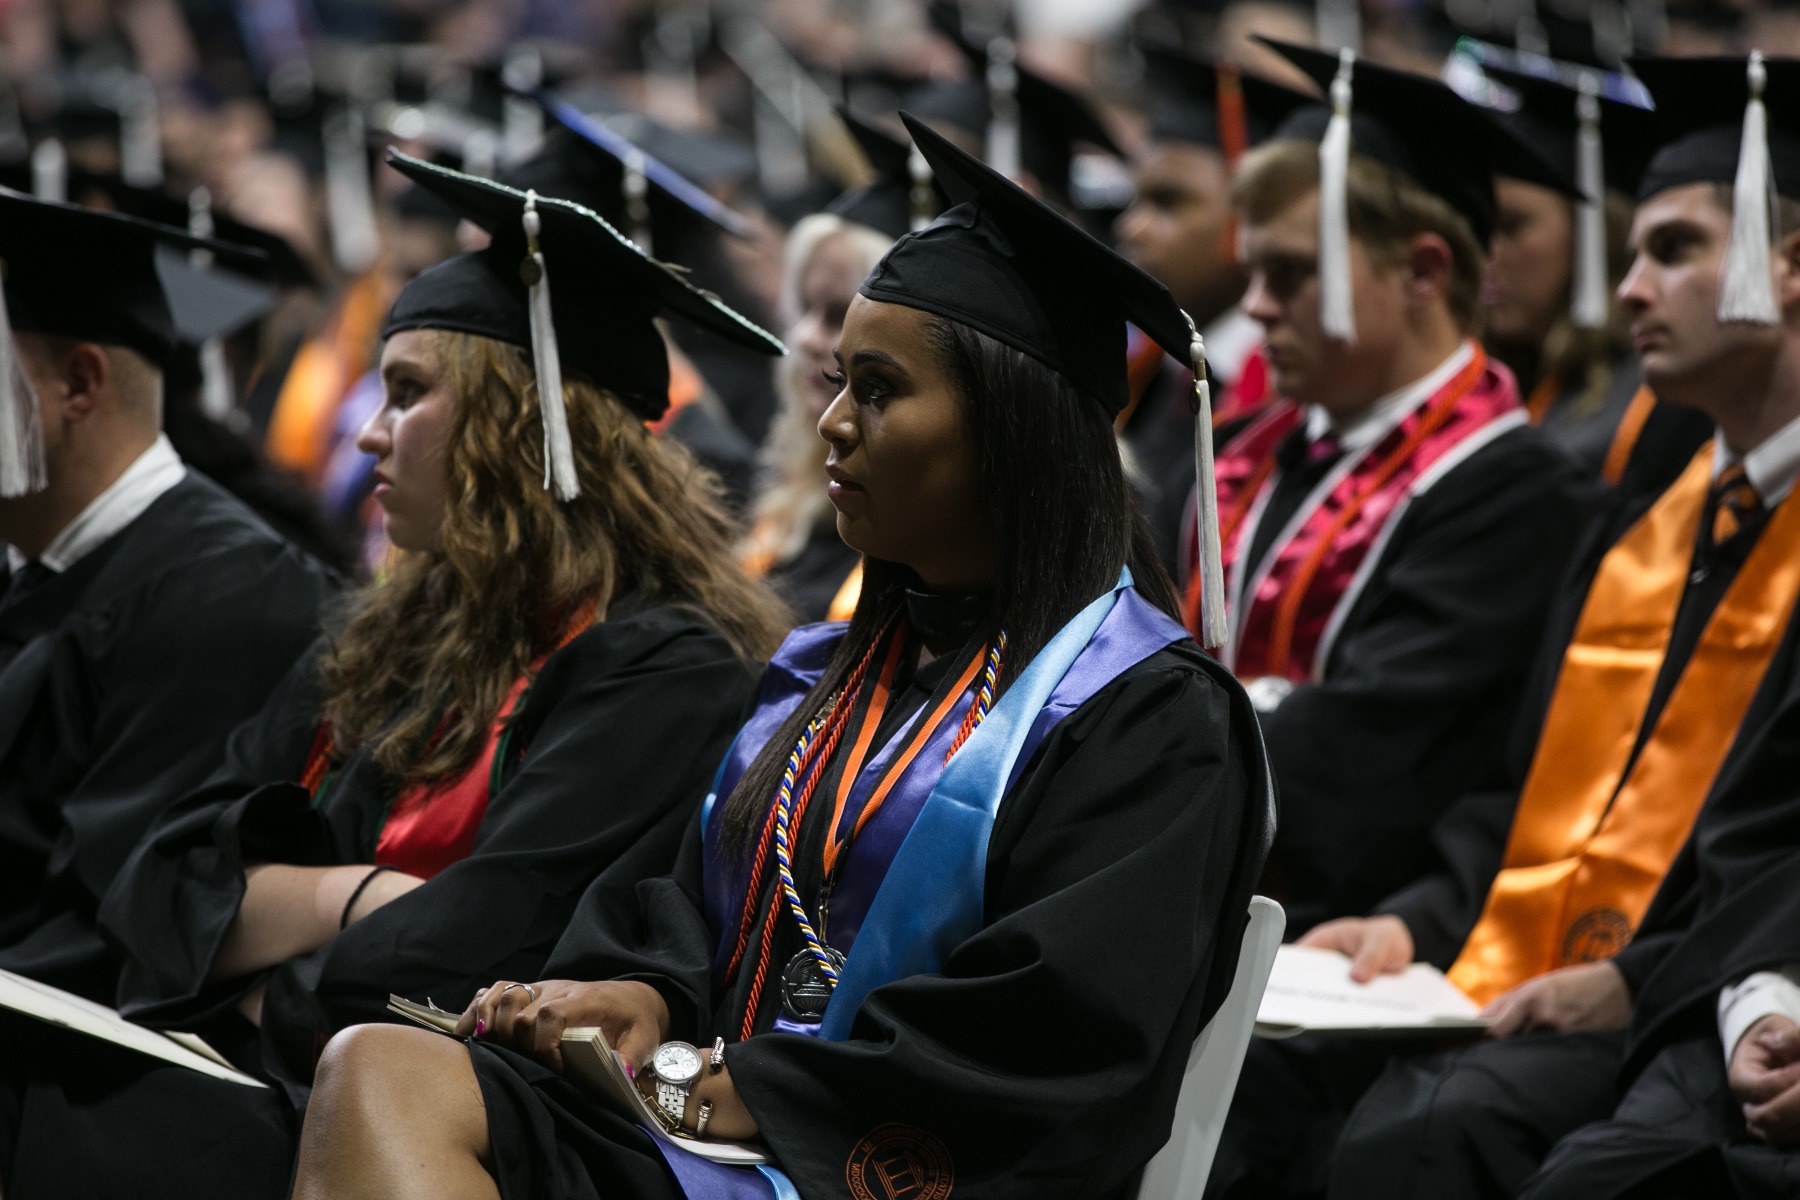 Mercer moves spring commencement ceremonies to August - The Den